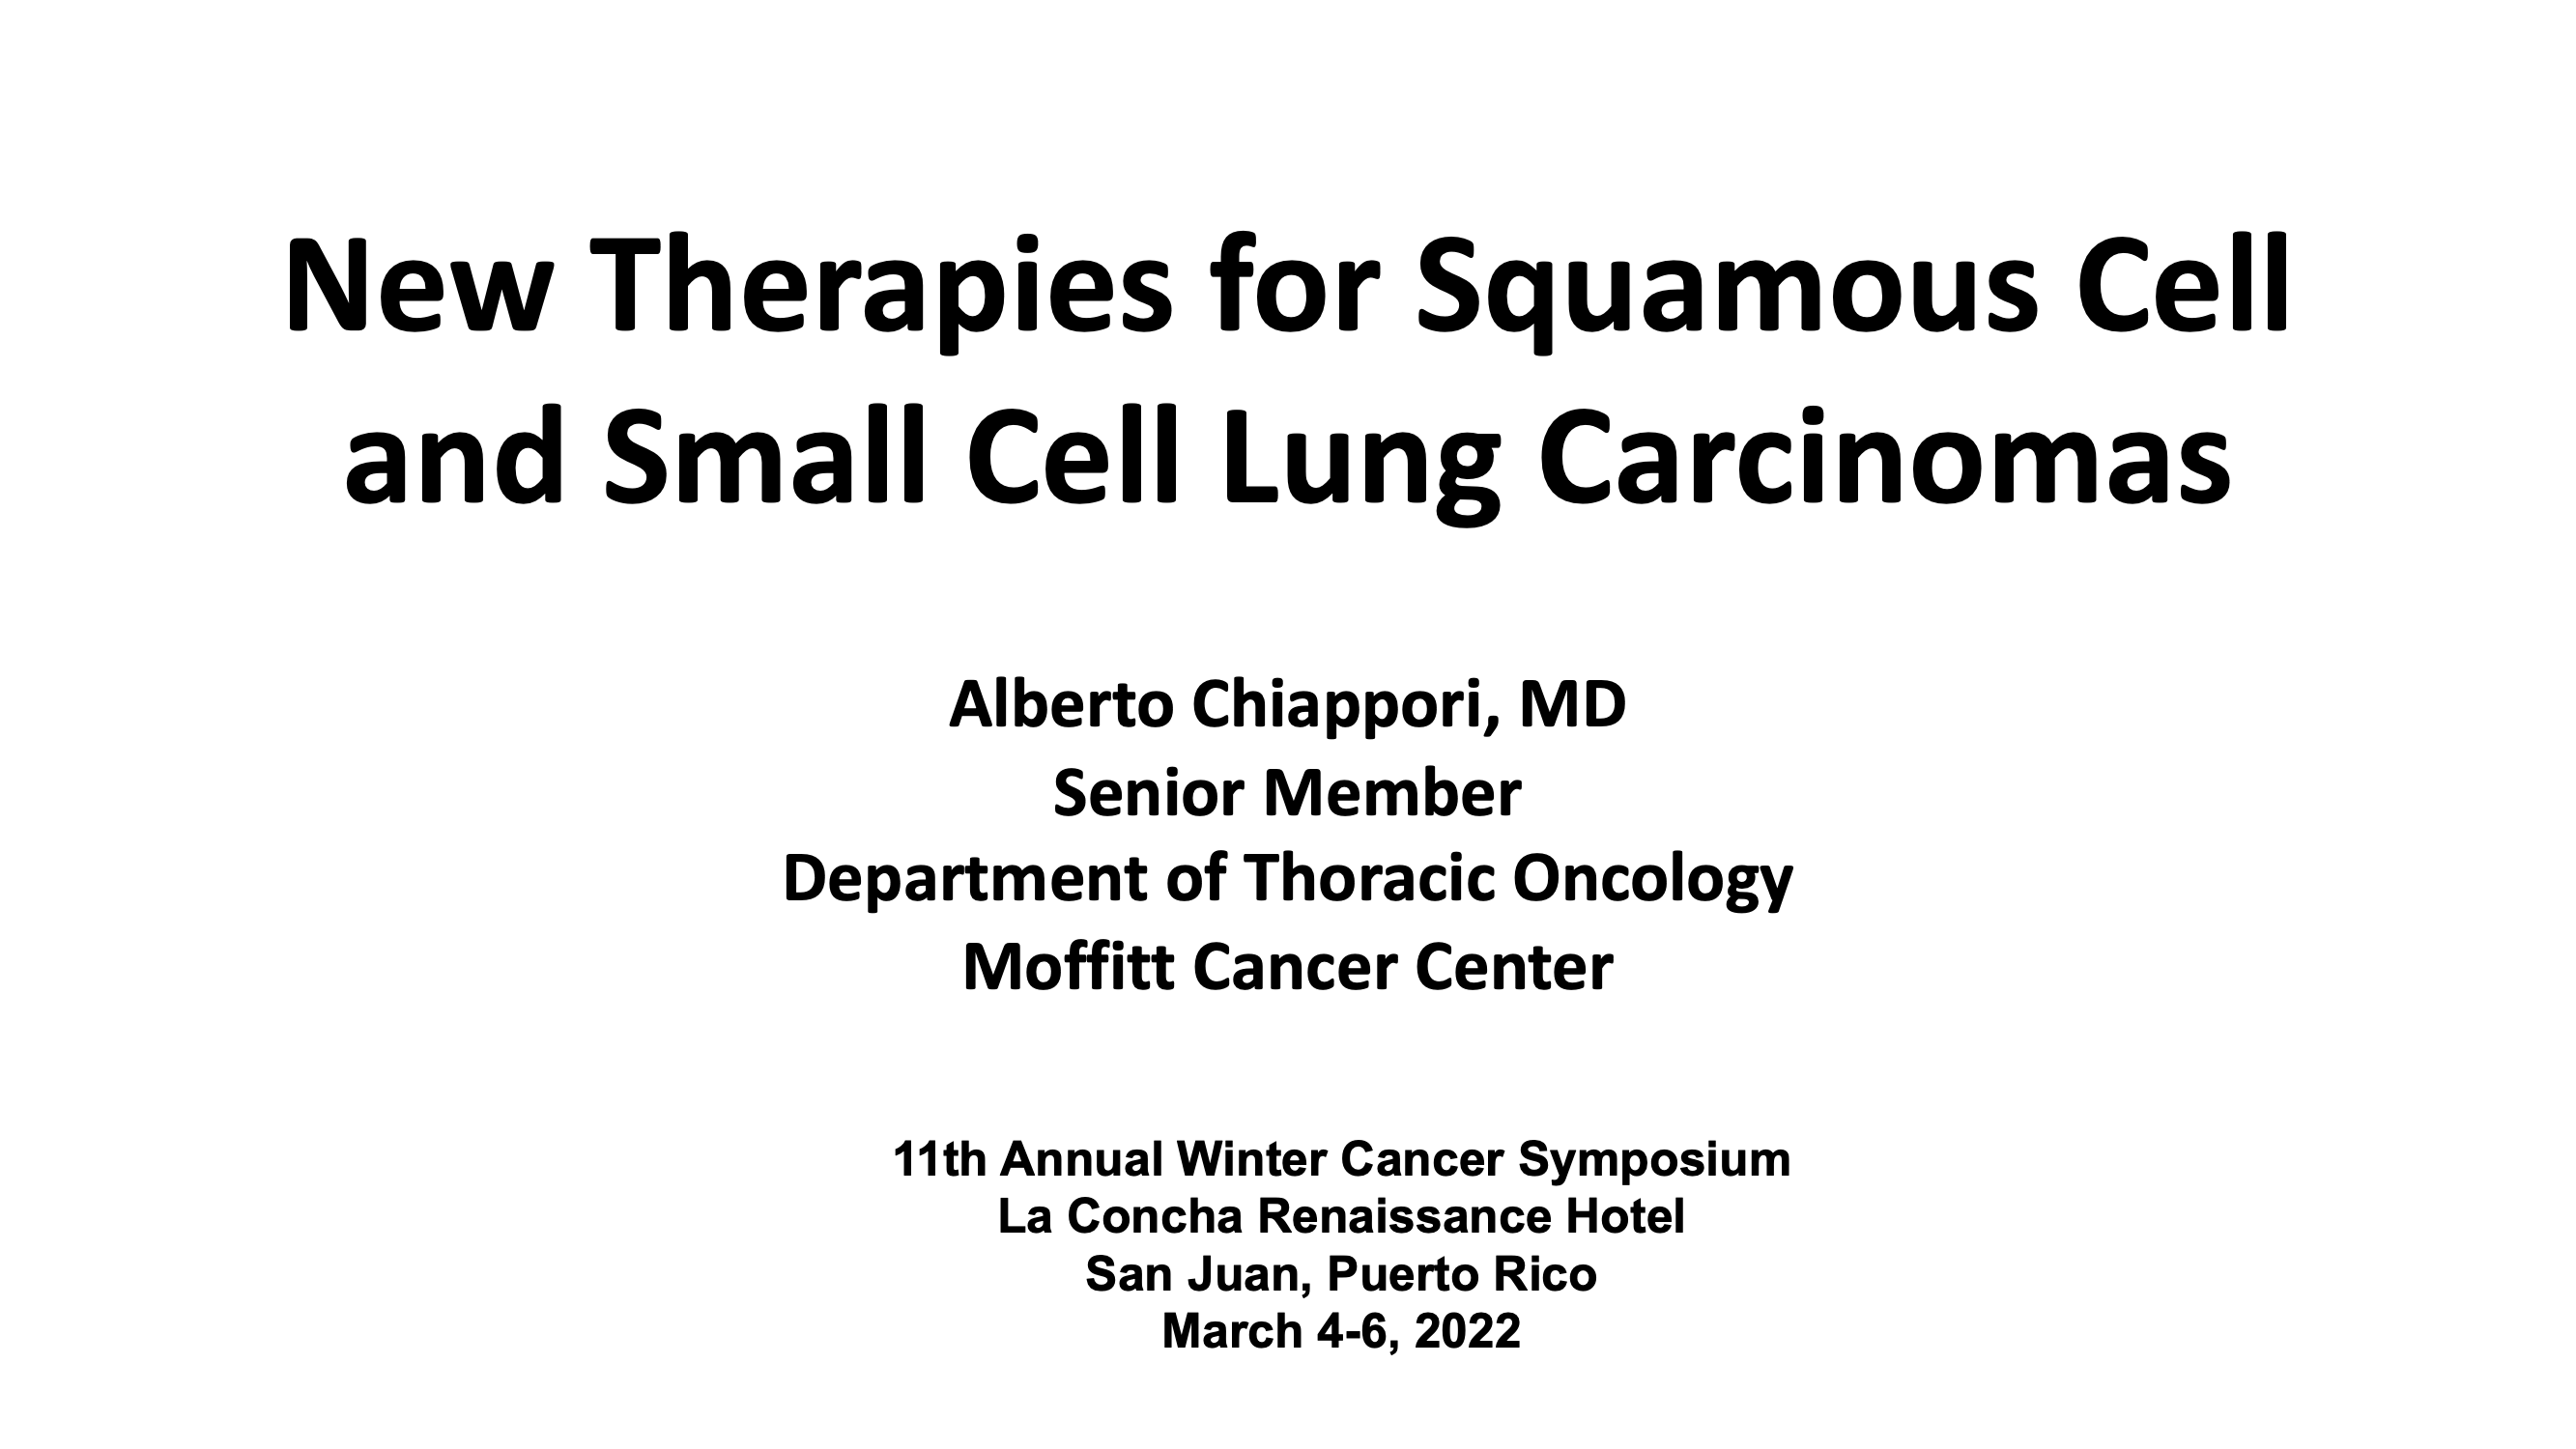 New Therapies for Squamous Cell and Small Cell Lung Carcinomas